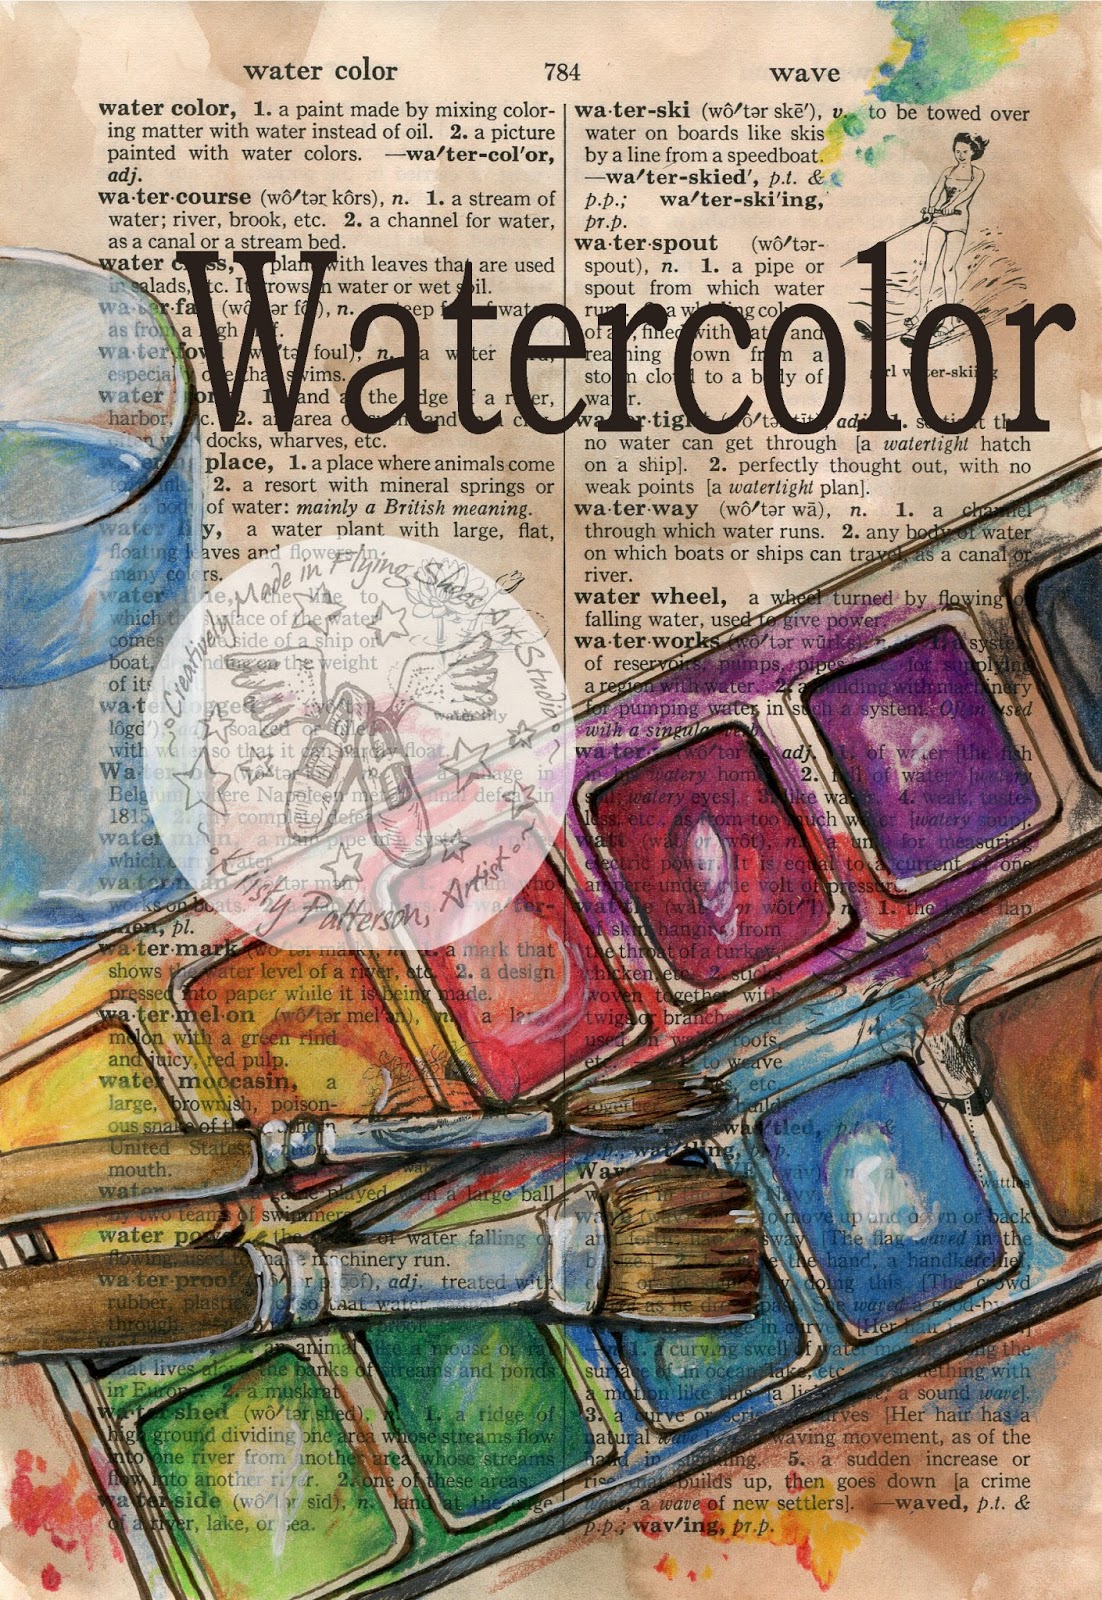 10 Watercolor Paintings You Need to Know - Artsper Magazine